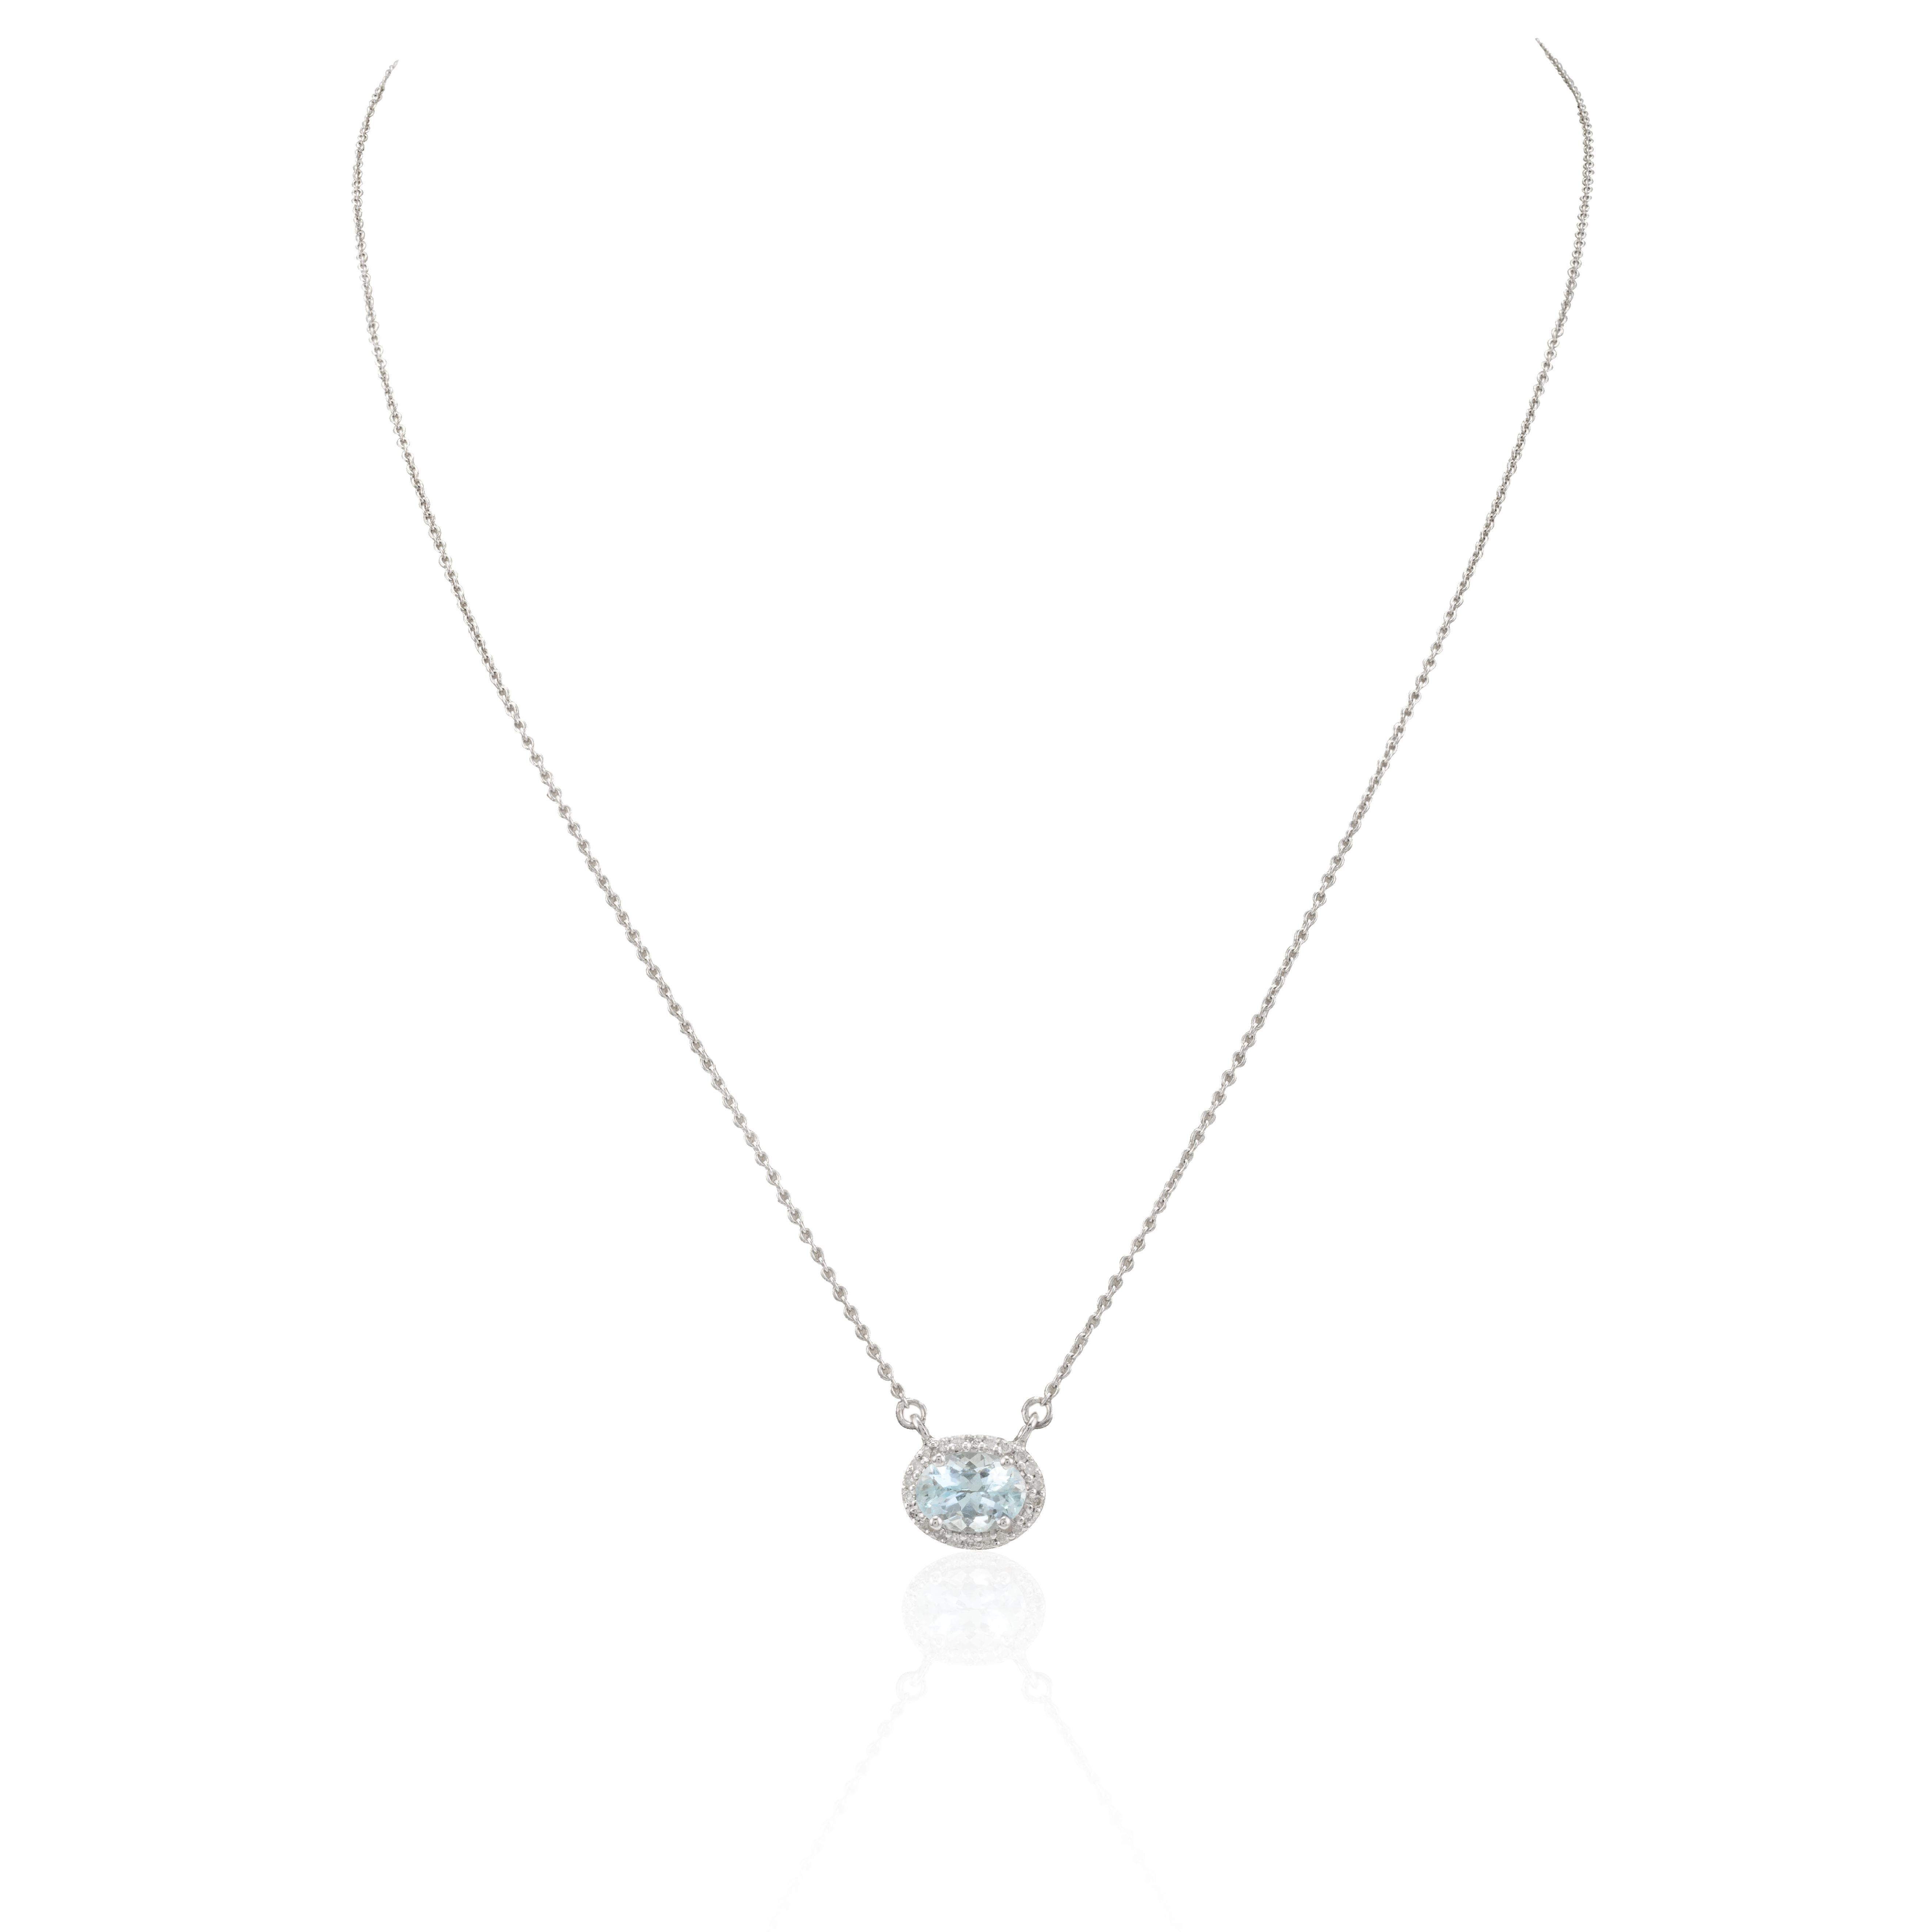 Modern Halo Diamond Aquamarine Necklace 14k Solid White Gold, Thank You Gift For Her For Sale